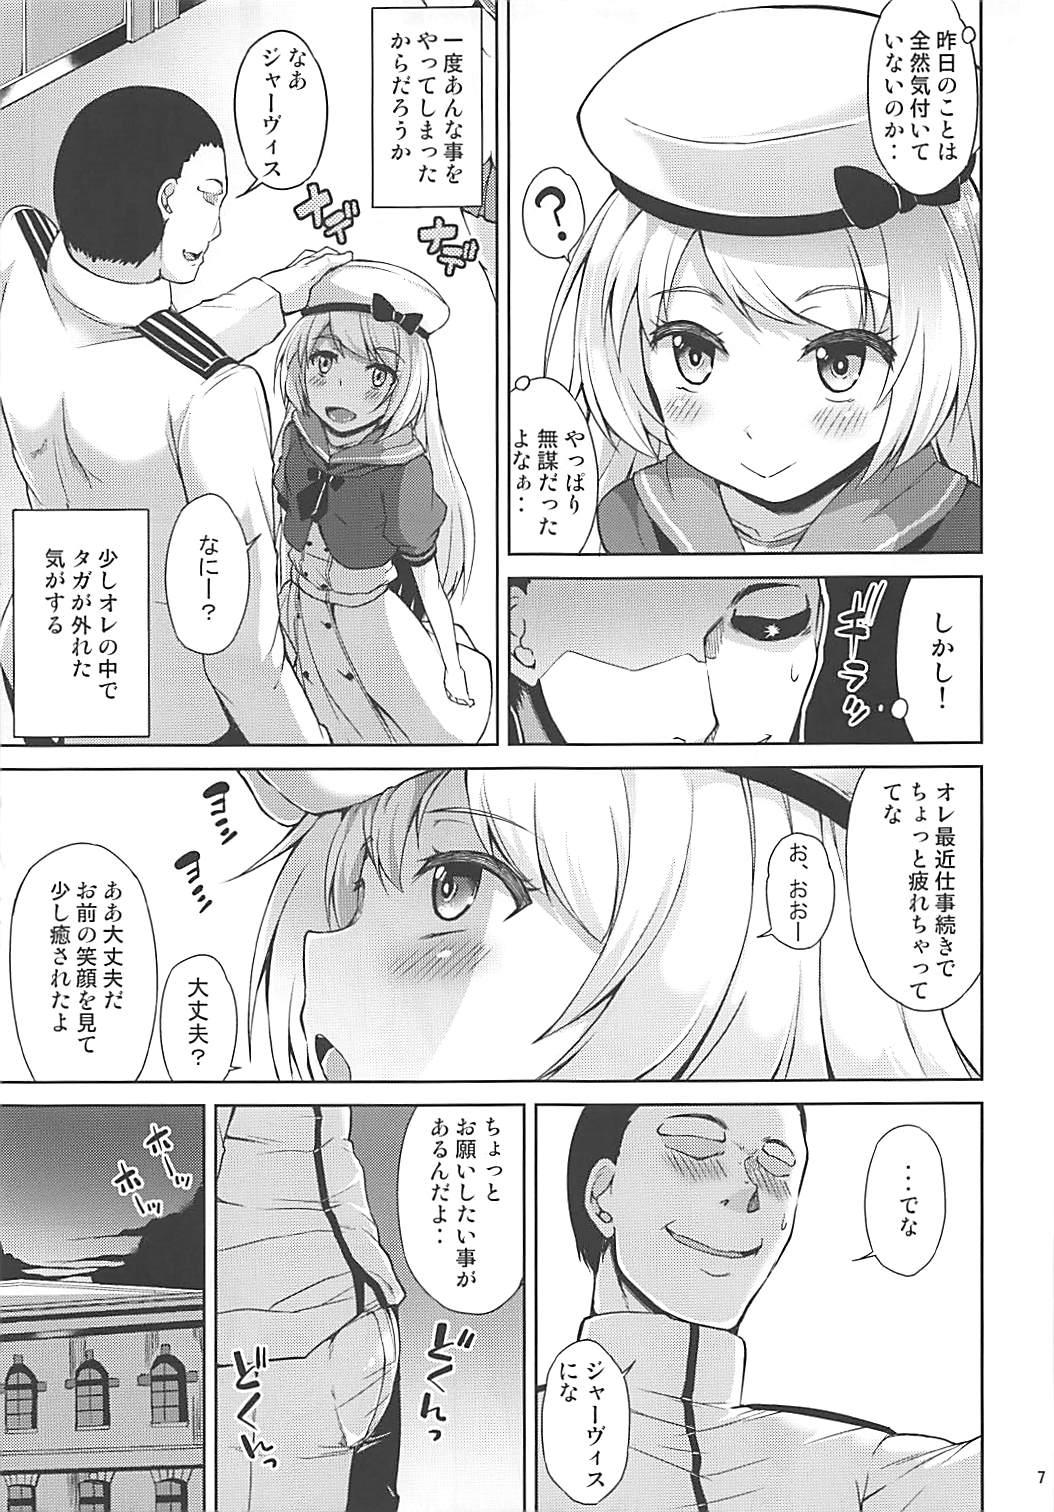 Full Movie Service Manten Jervis-chan - Kantai collection Tit - Page 8